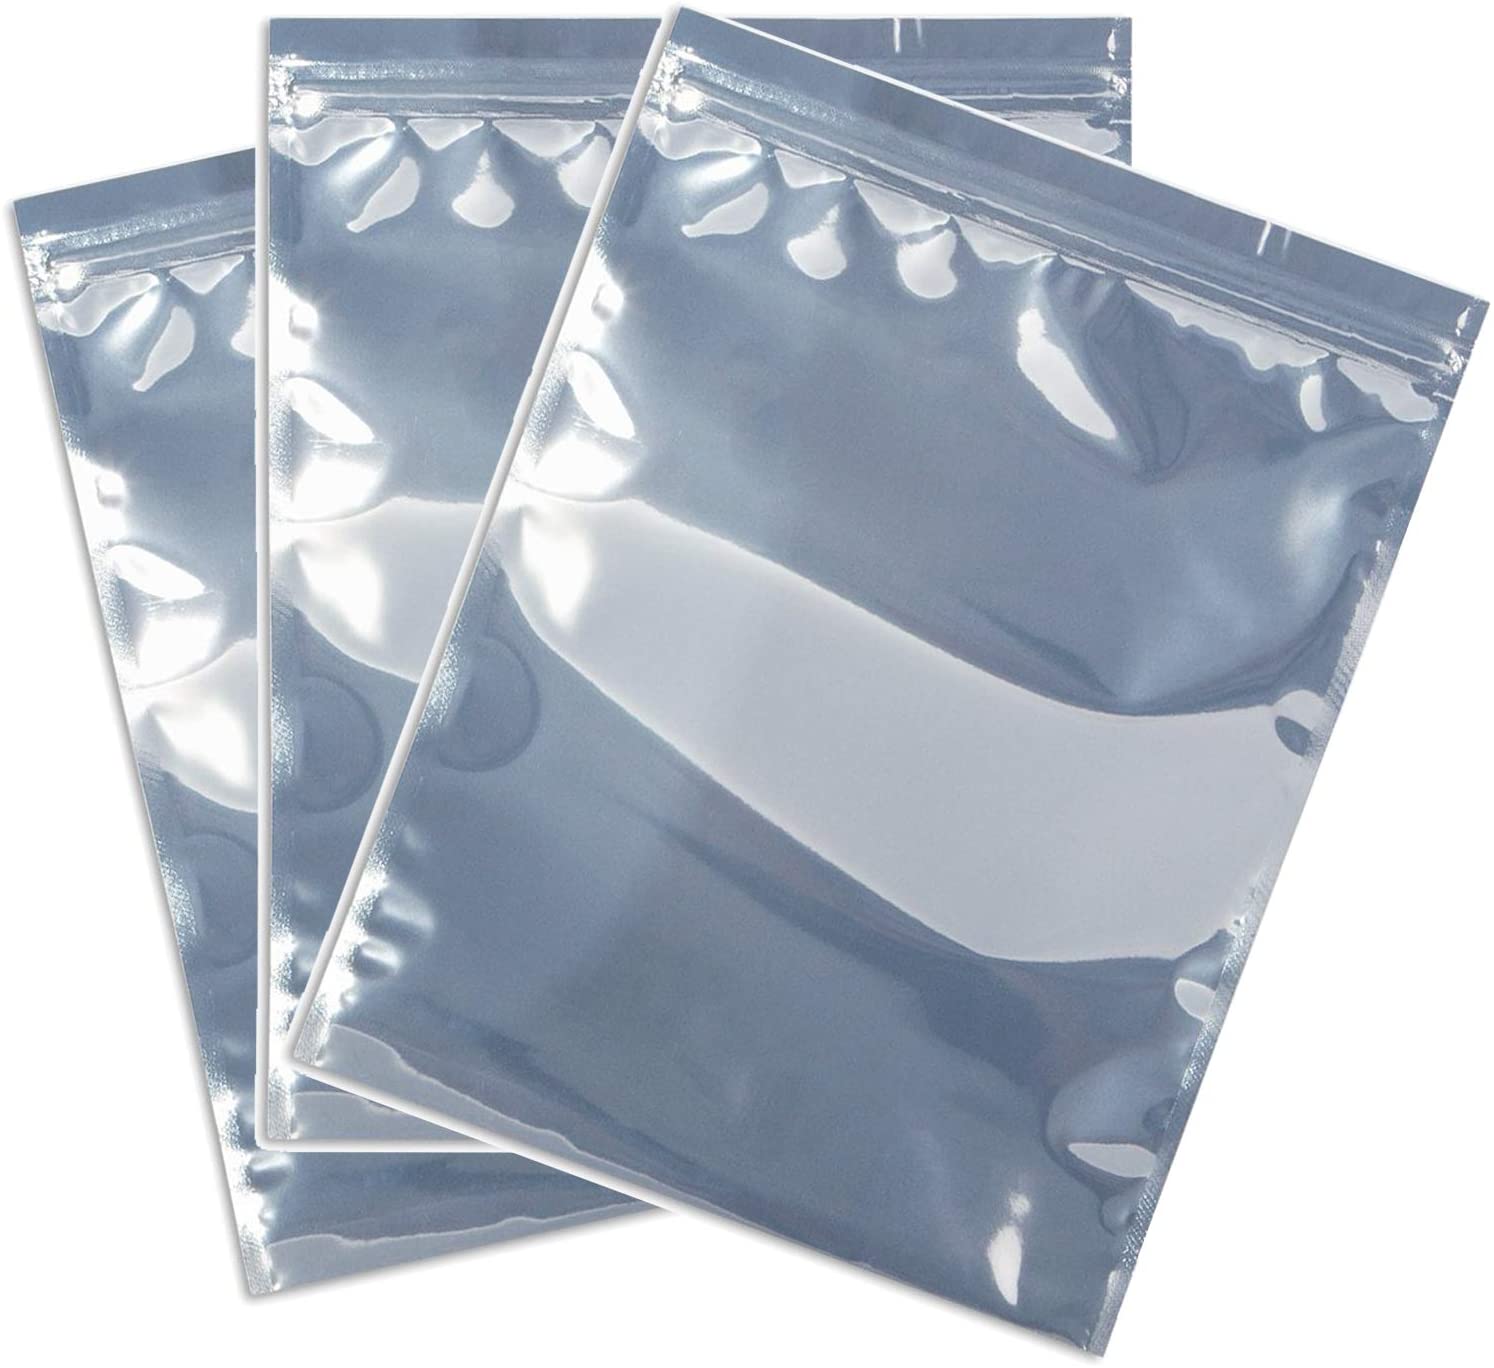 Across tooth Empire Wholesale 15pcs Antistatic Bag, 11x15 inch Anti Static Bags for  Electronics, Static Free Bag, ESD Anti Static Bag, Anti Static Bag Large,  Resealable Non Static Bags for Most of Computer Accessories 15